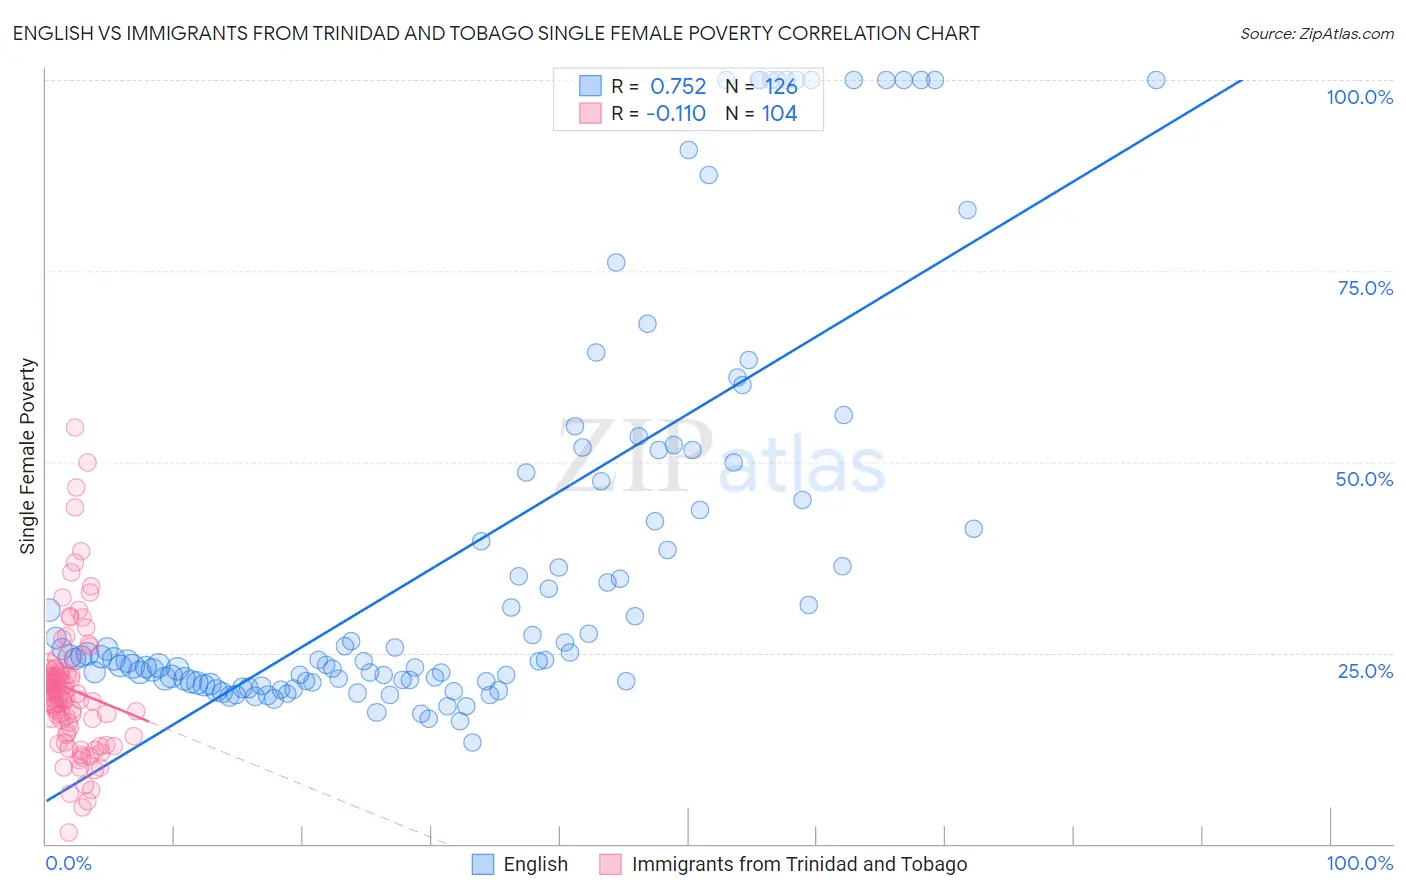 English vs Immigrants from Trinidad and Tobago Single Female Poverty